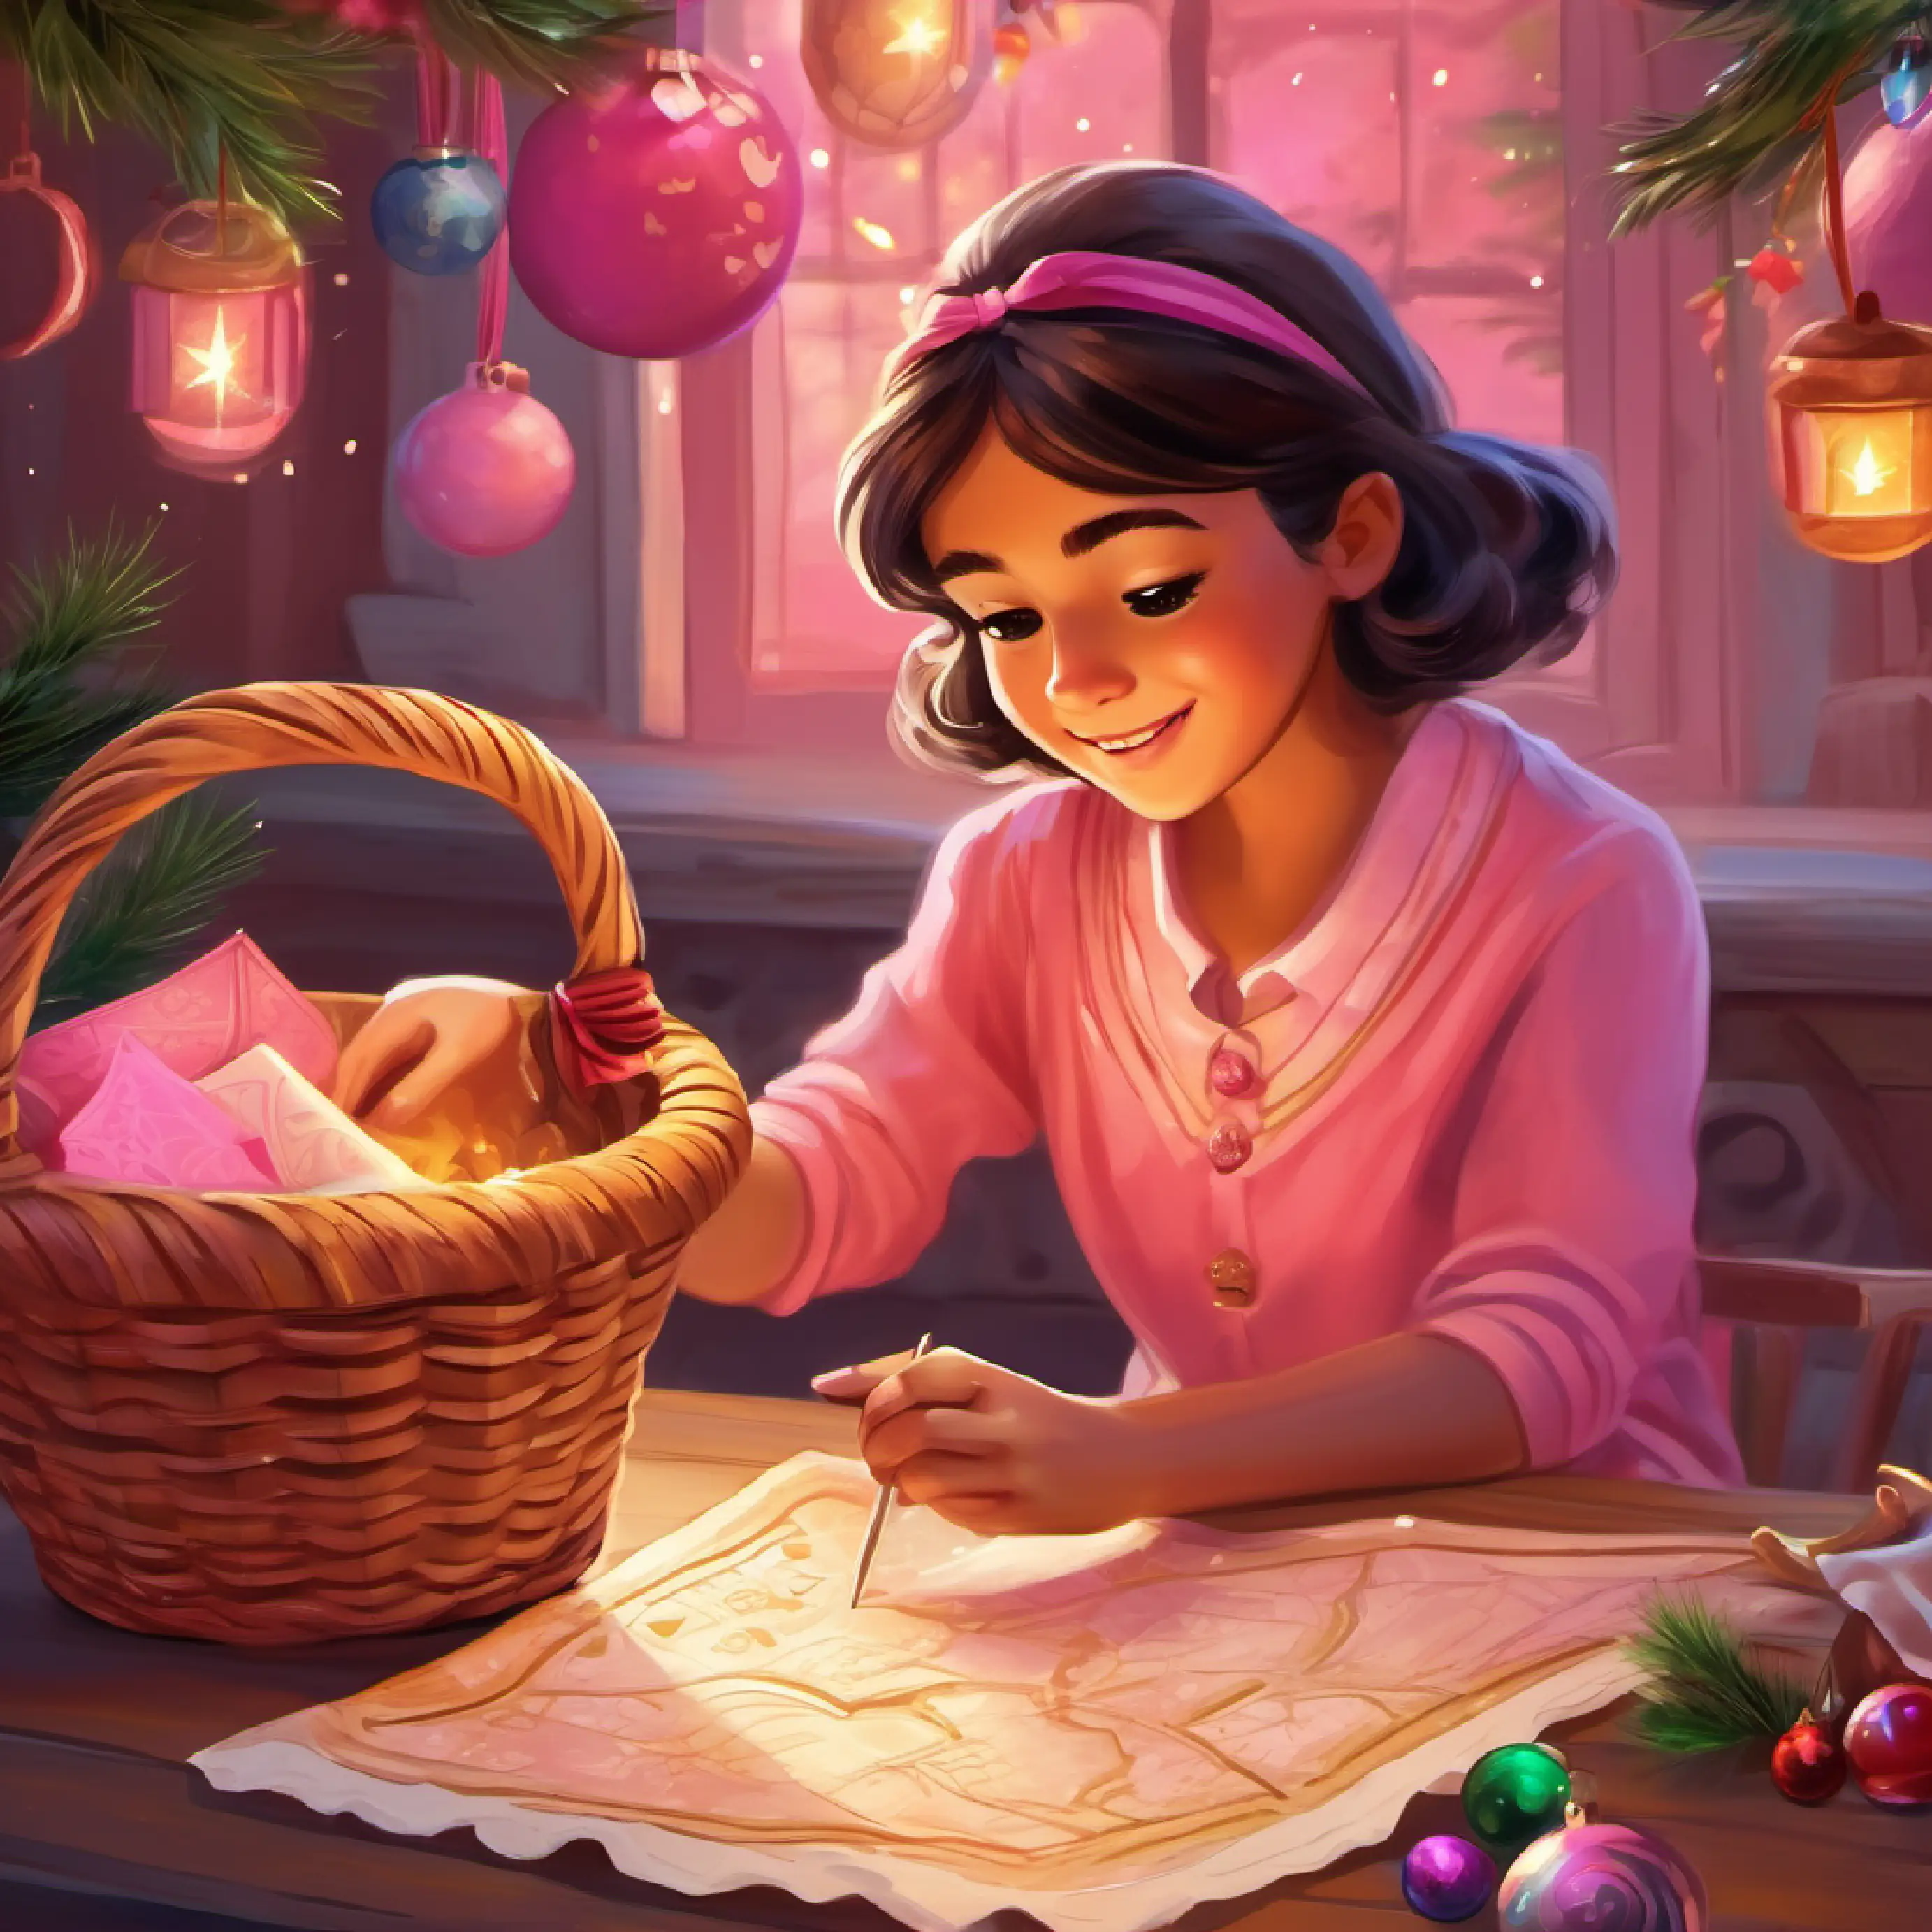 A spirited, curious girl with brown eyes and tanned skin eager for adventures uncovers a treasure map and enticing note in the pink basket.